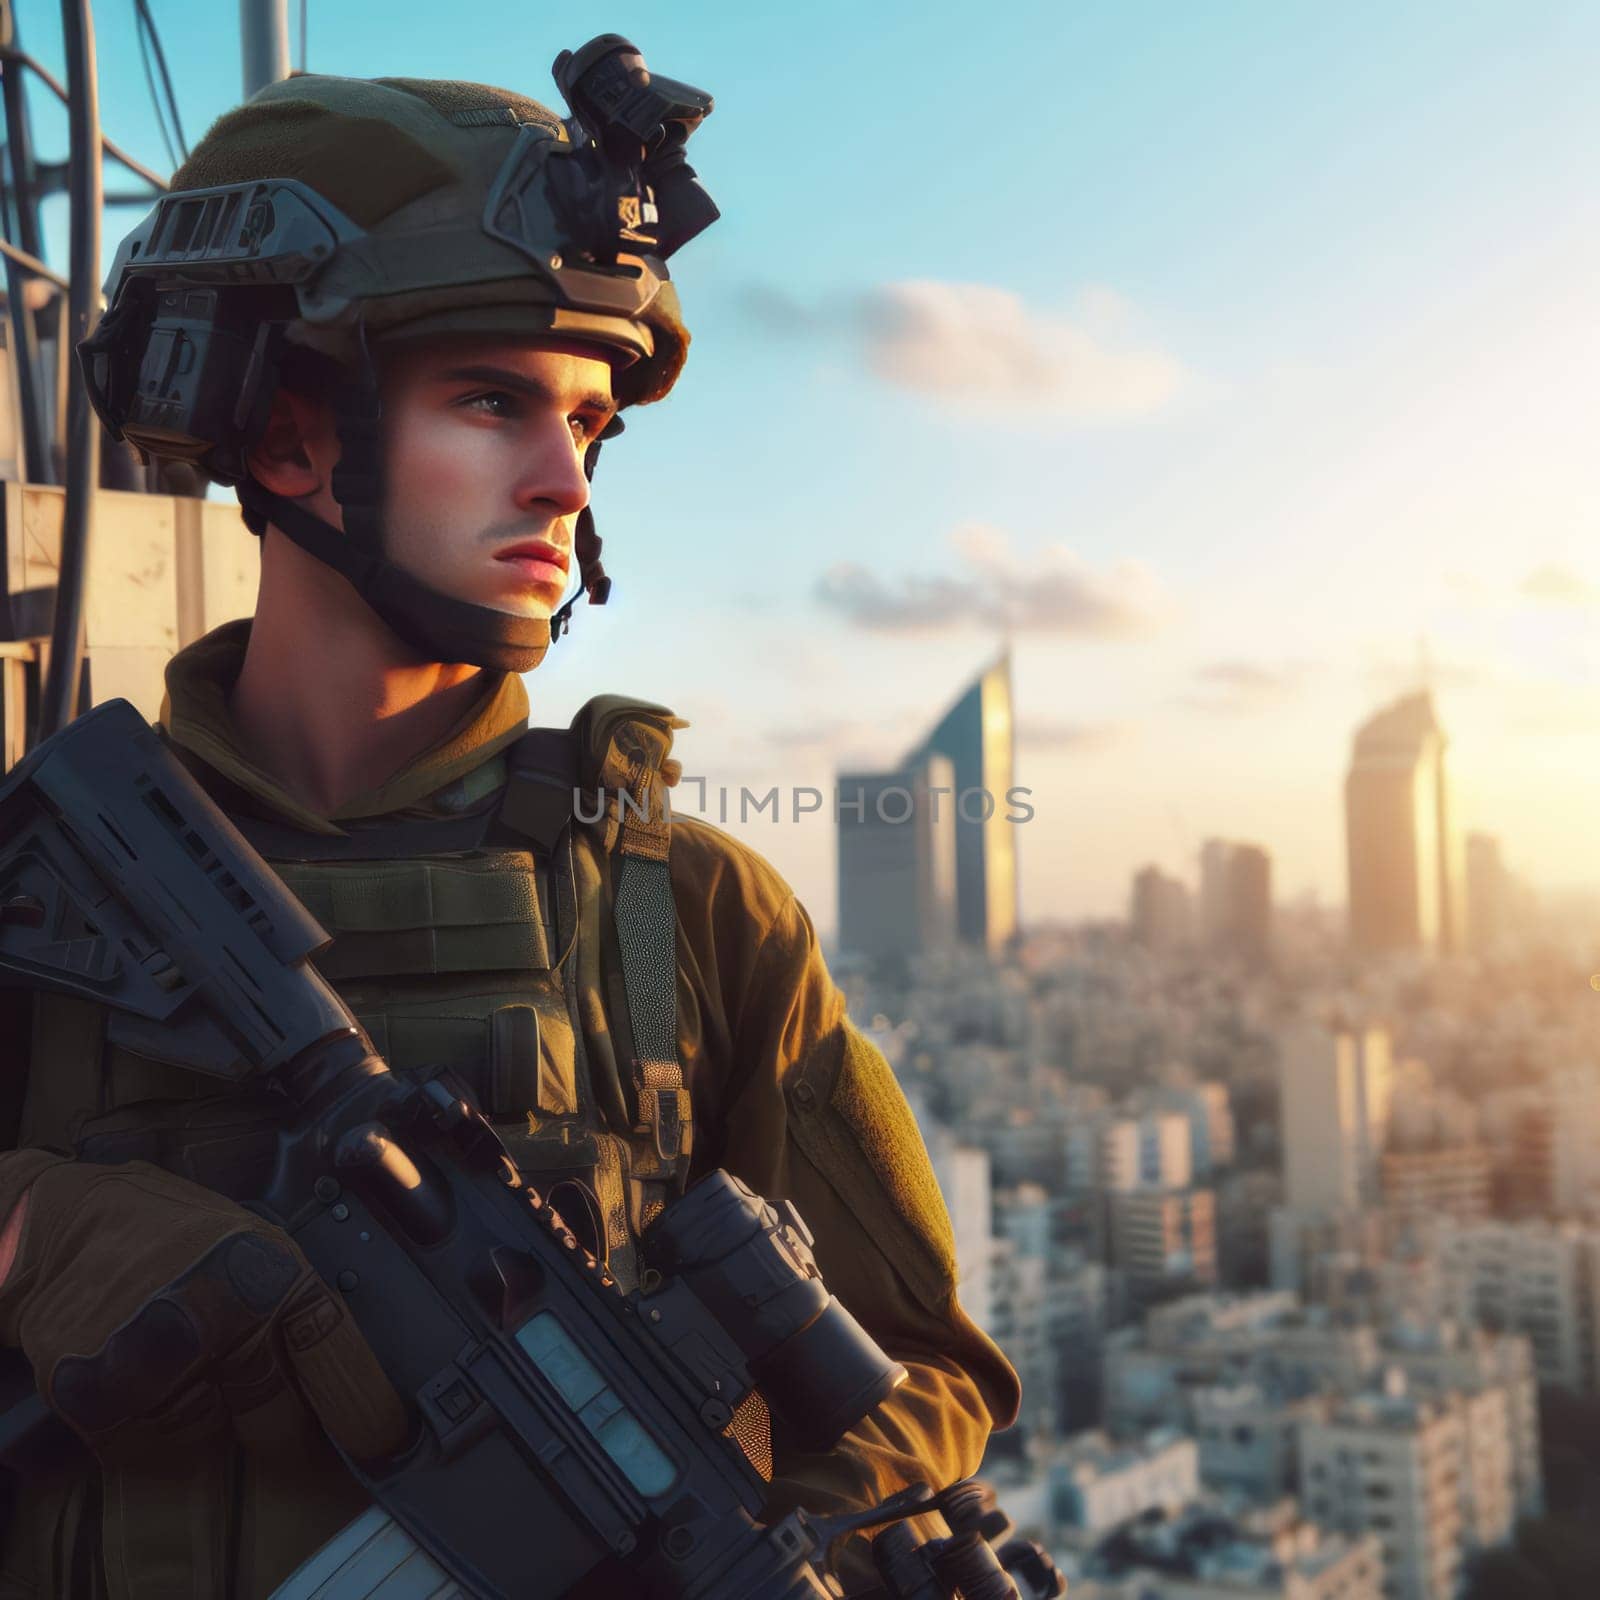 Israeli soldier in full gear with a blurred city skyline in the background